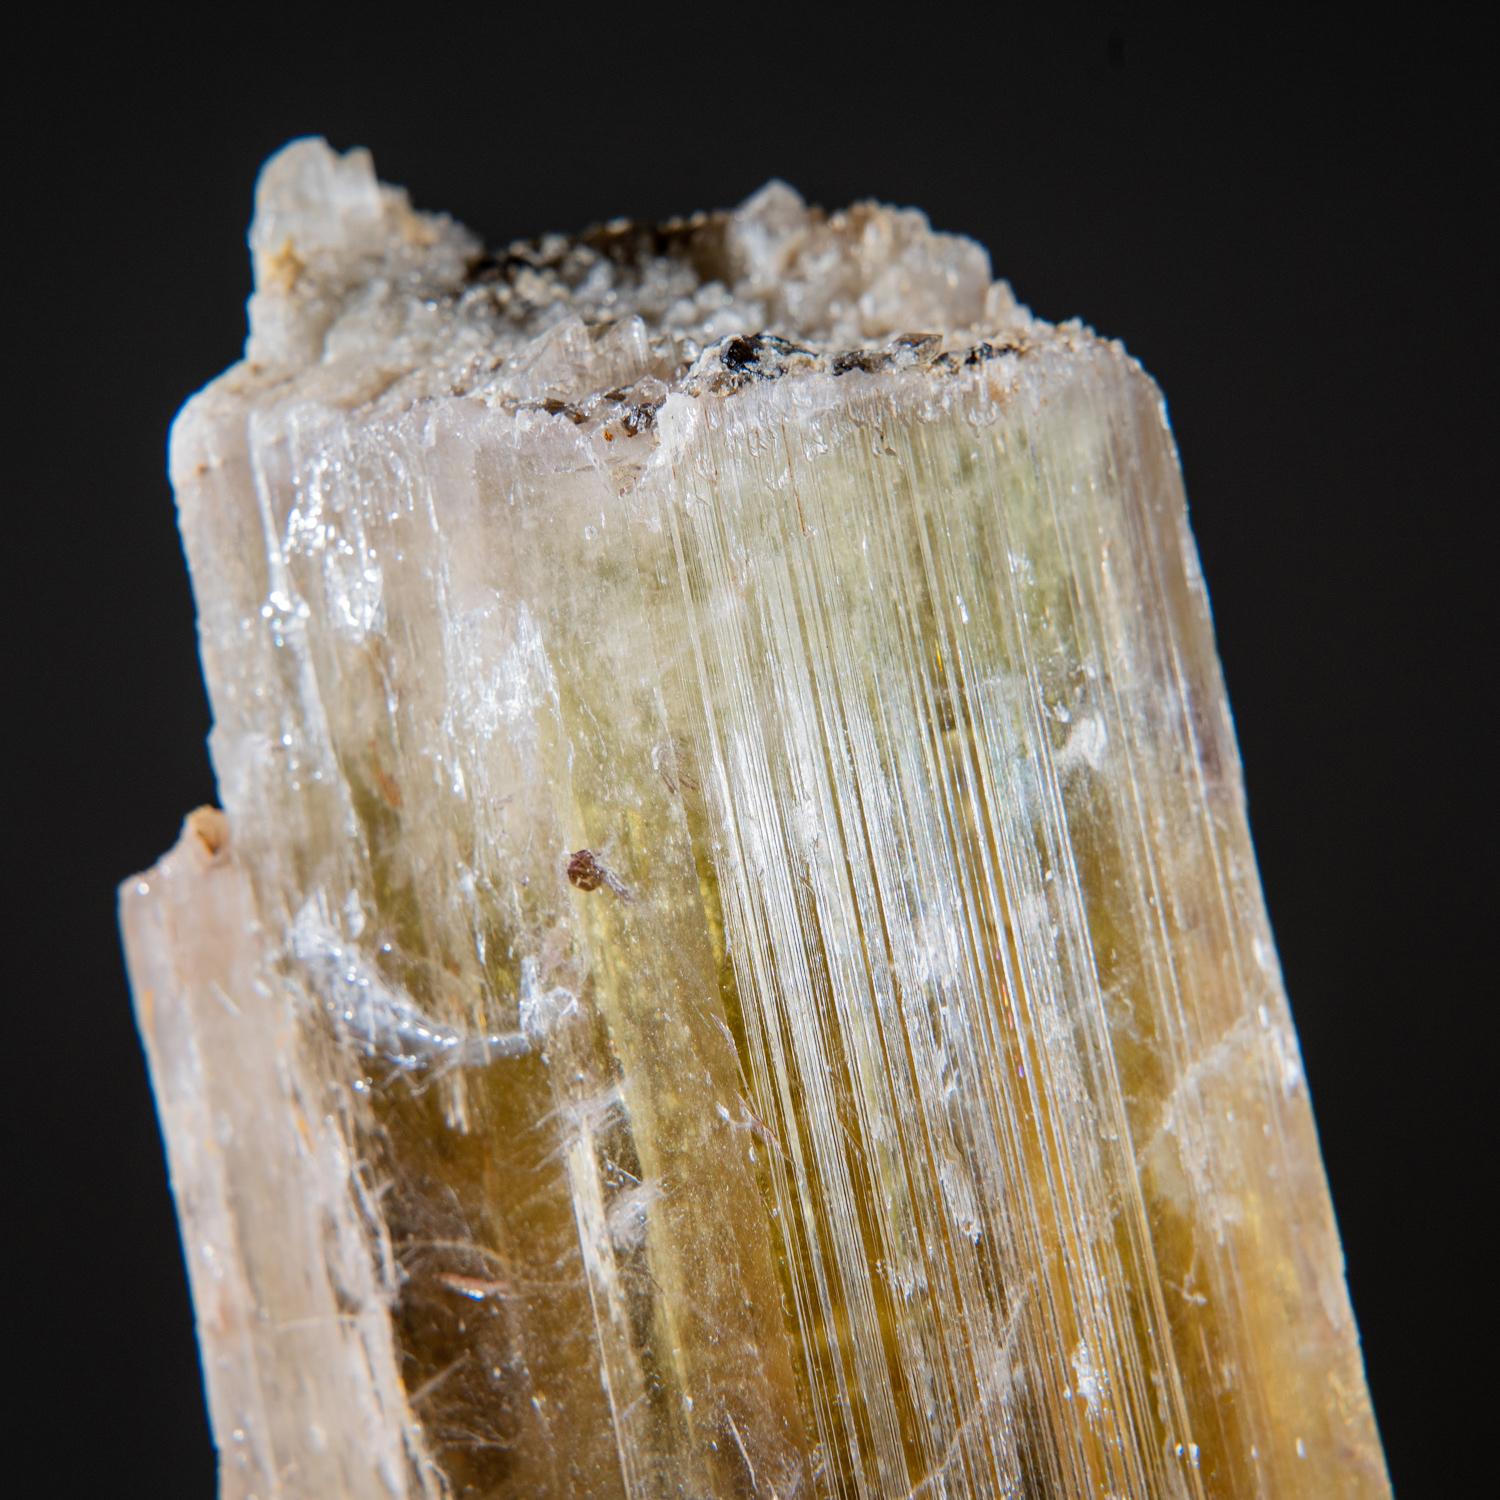 Here is very blocky, fine quality, facet grade, light tone of Spodumene var. yellow kunzite crystal. This spectacular medium light tone yellow-green spodumene crystal is of natural color, it has not been treated or color enhanced in any